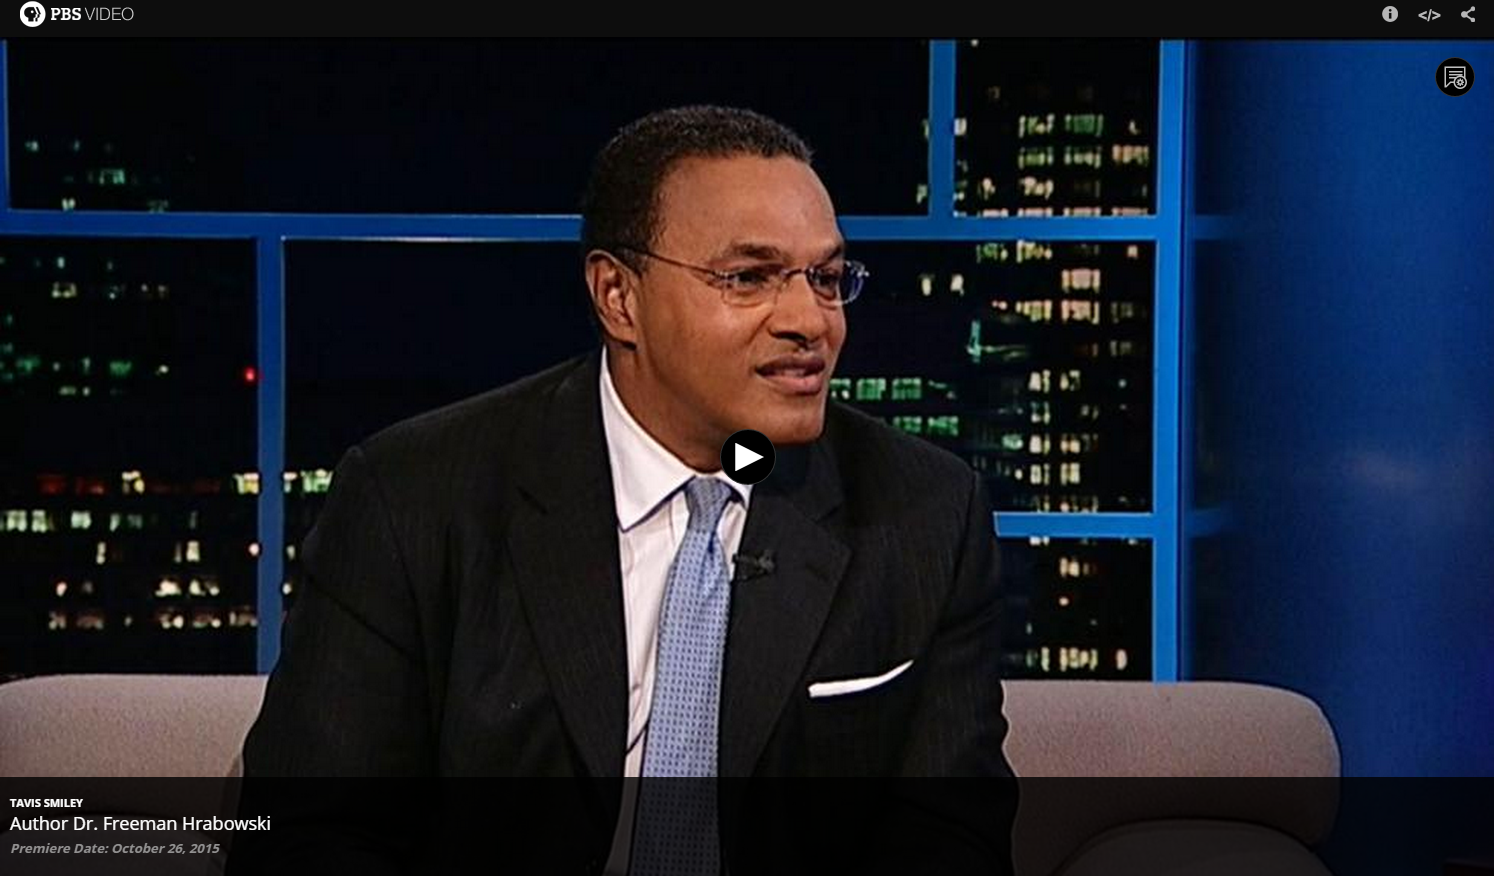 President Hrabowski discusses how his experiences during the Civil Rights movement inspired his career in education